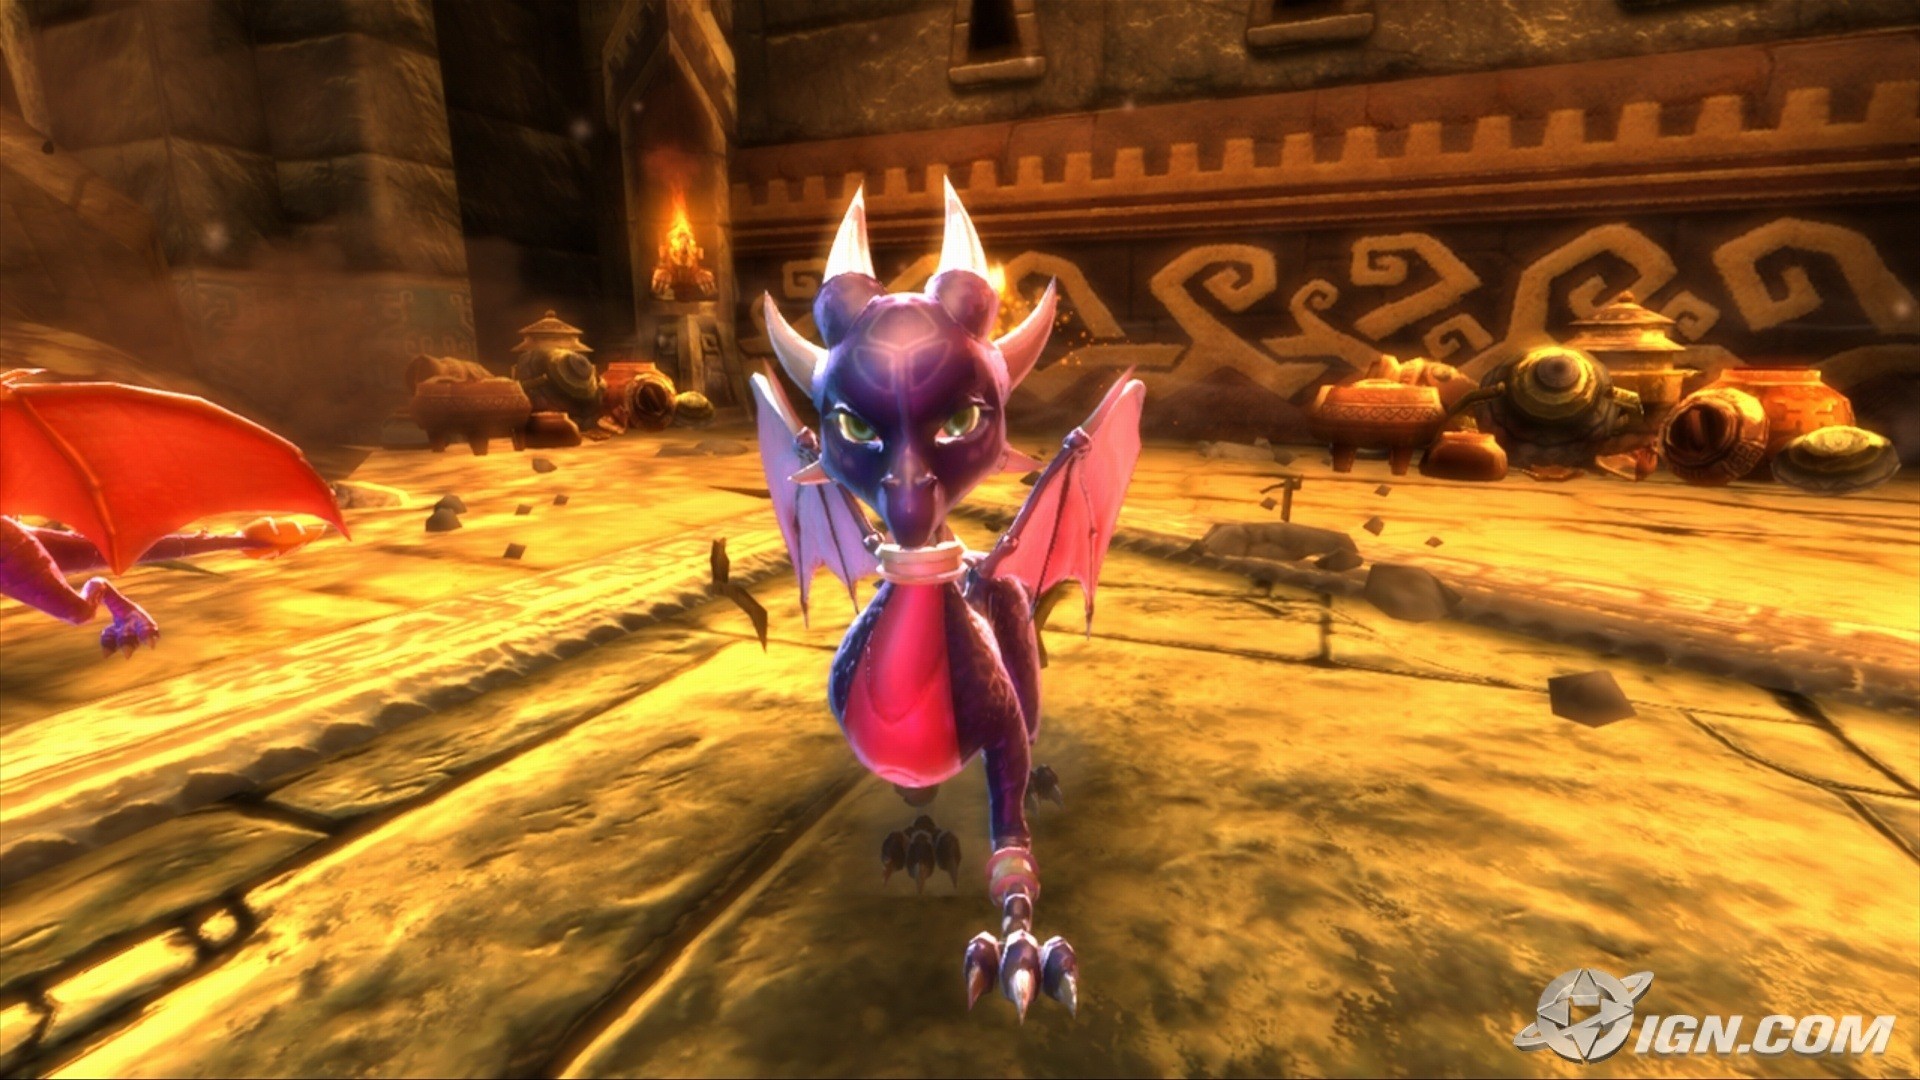 1920x1080 Spyro: Dawn of the Dragon Screenshots, Pictures, Wallpapers - PlayStation 3  - IGN